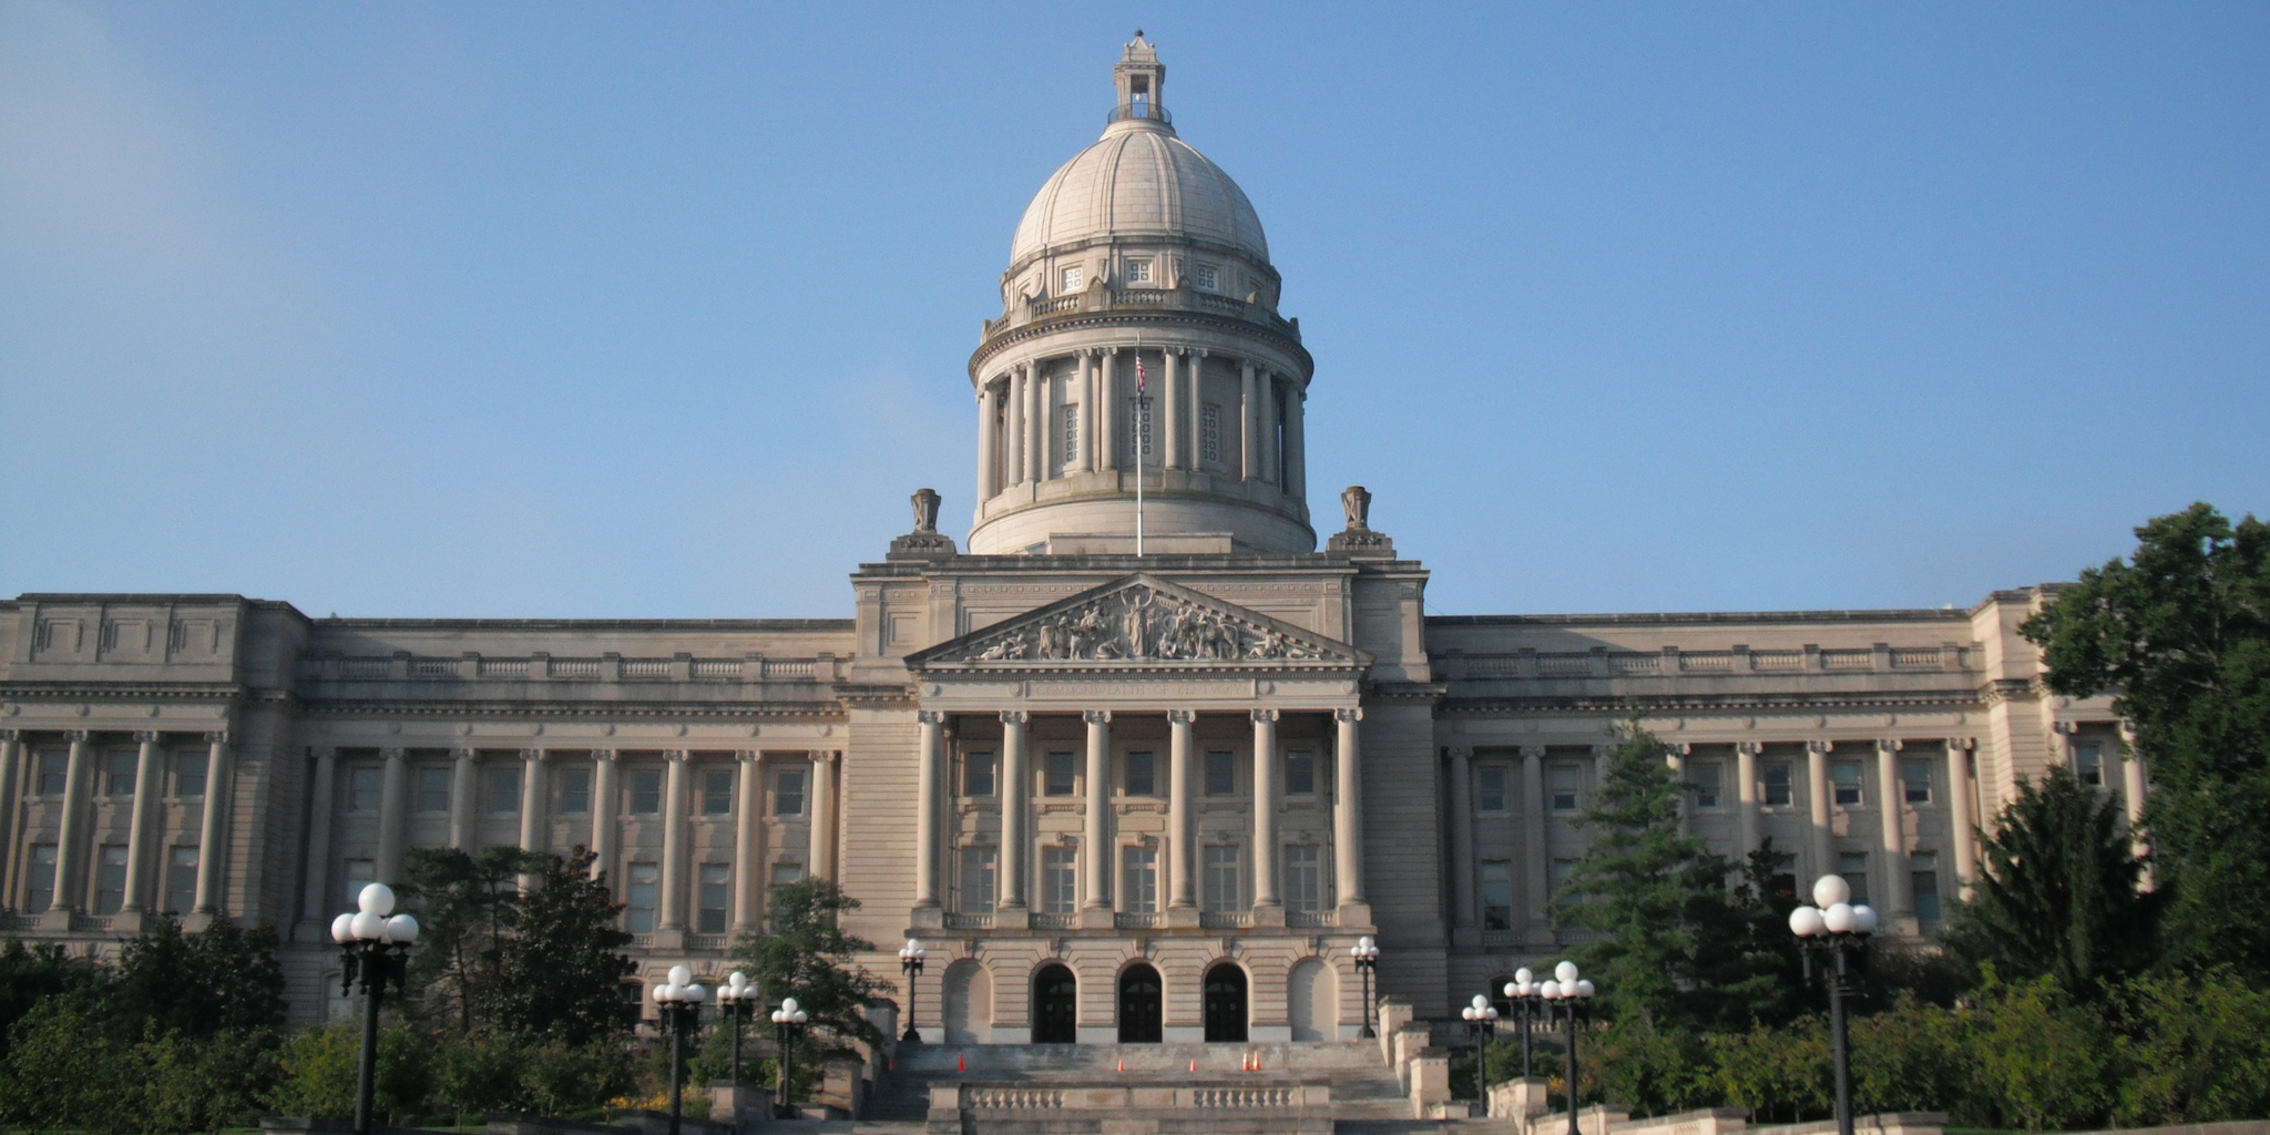 Kentucky state capitol